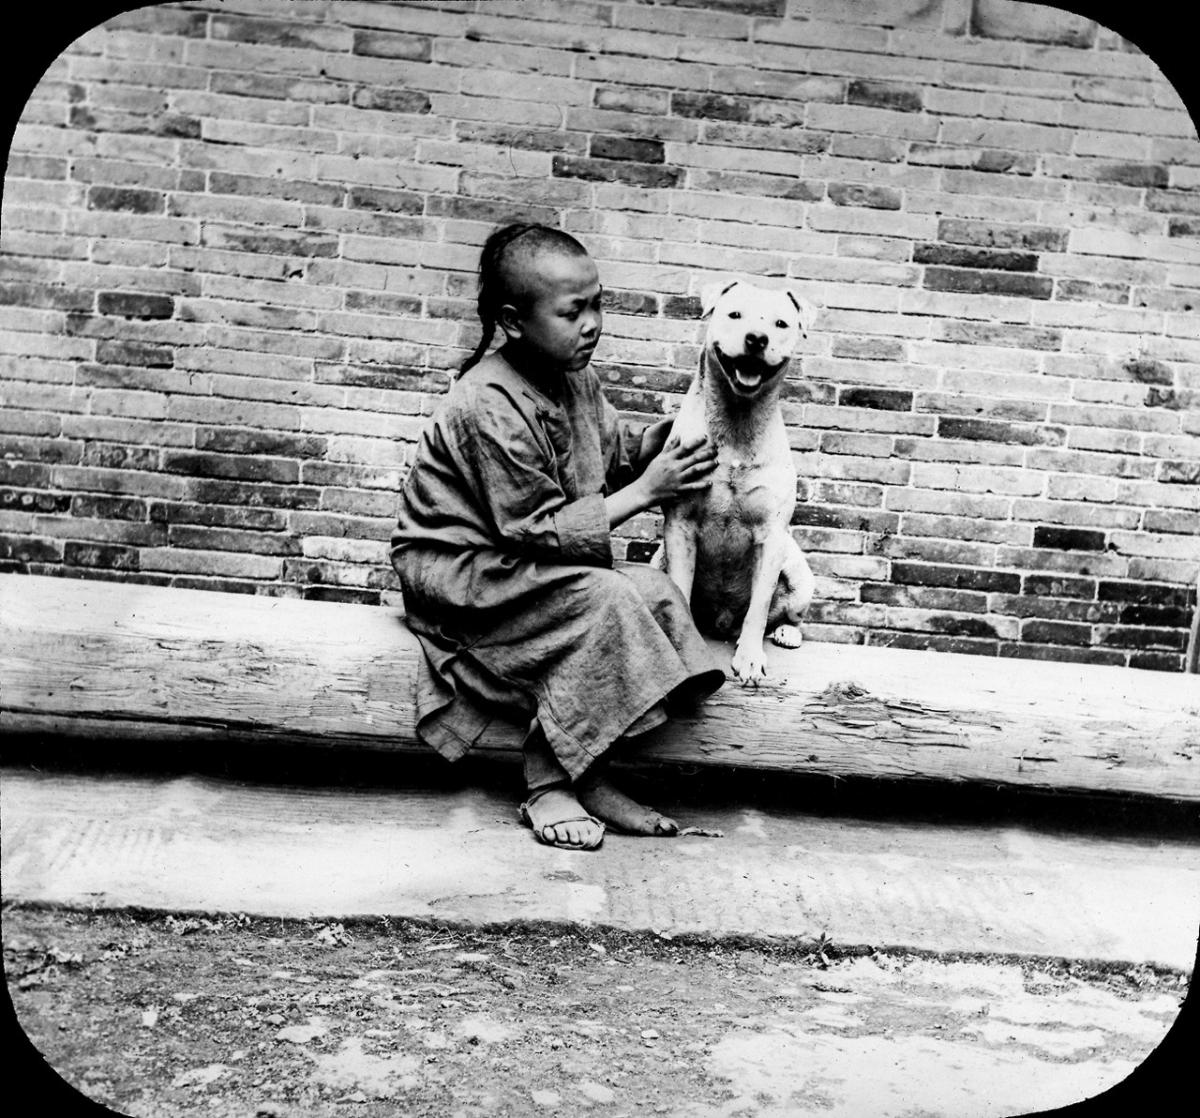 A lantern slide from the Ferracute Machine Company, depicting an unidentified child sitting with Snooks the dog in China, 1898.